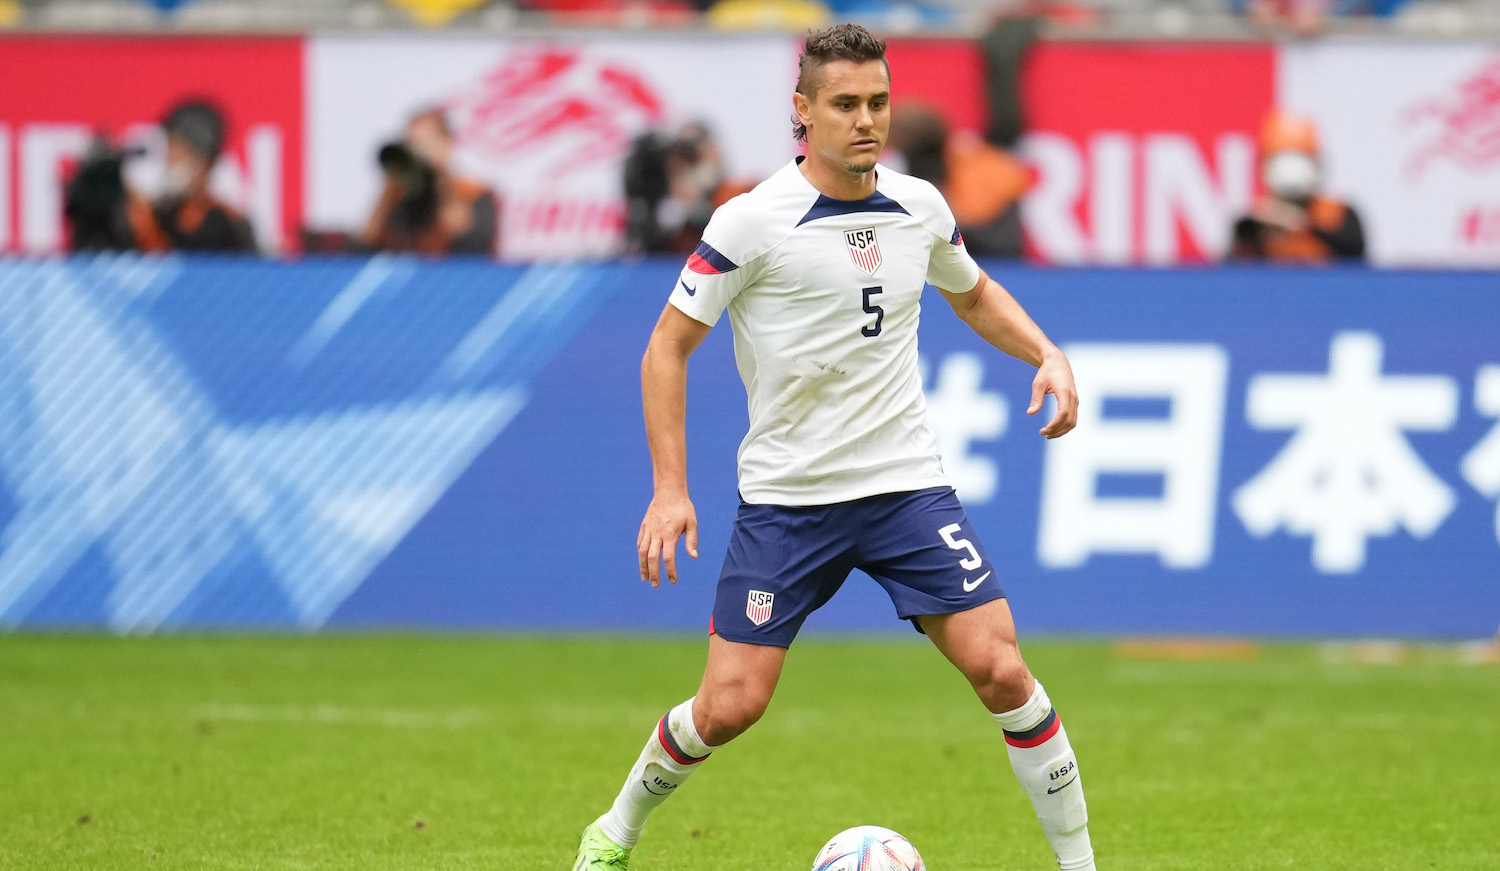 DÜSSELDORF, GERMANY - SEPTEMBER 23: Aaron Long #5 of the United States looking for an open man during a game between Japan and USMNT at Düsseldorf Arena on September 23, 2022 in Düsseldorf, Germany. (Photo by Brad Smith/ISI Photos/Getty Images)